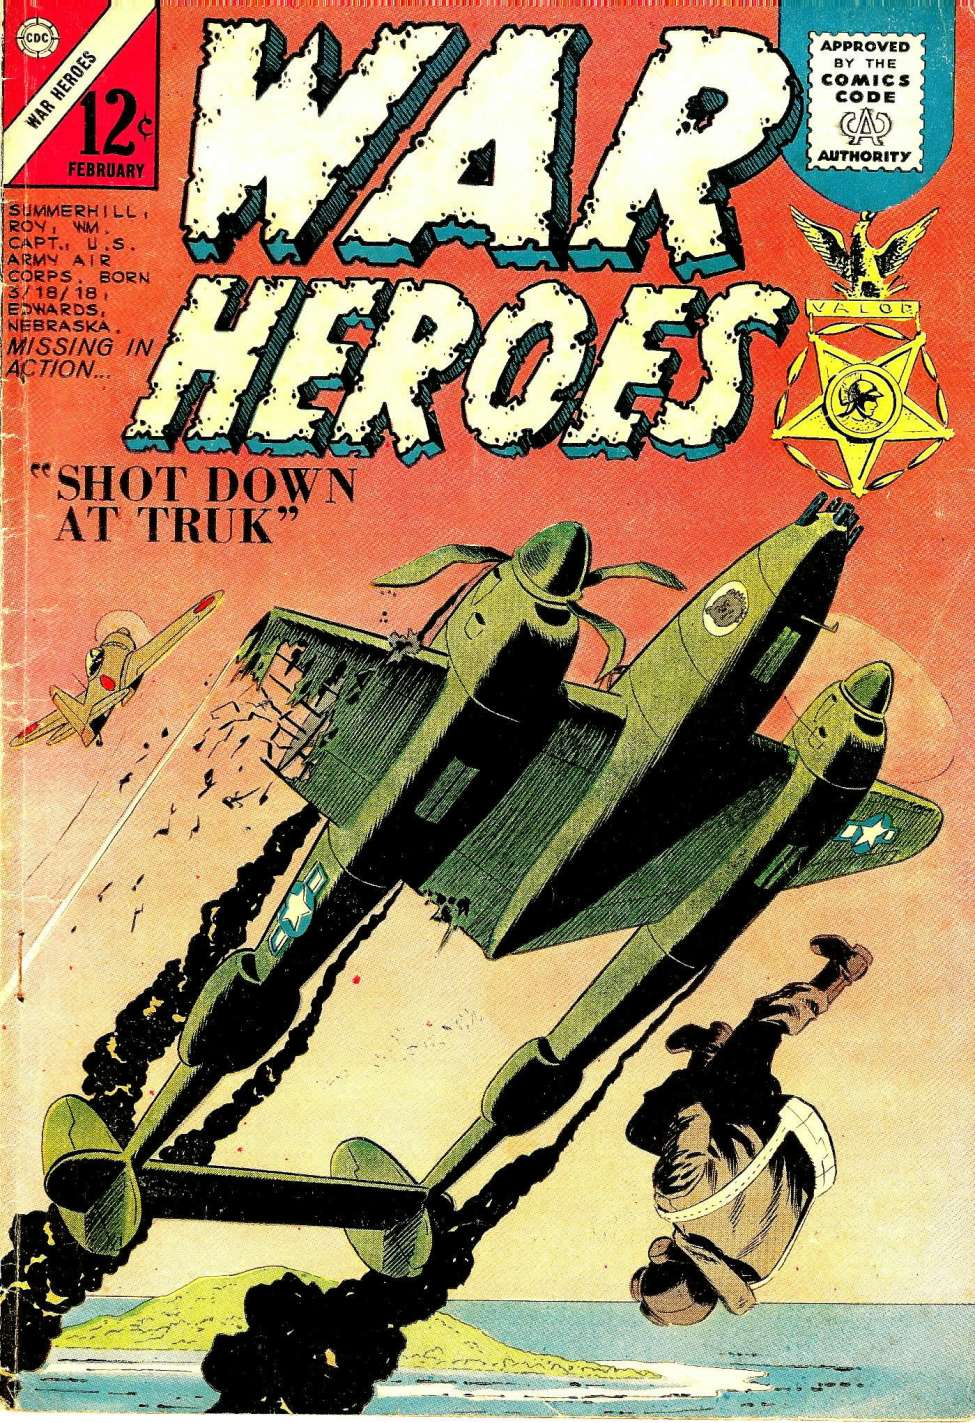 Comic Book Cover For War Heroes 7 (alt) - Version 2